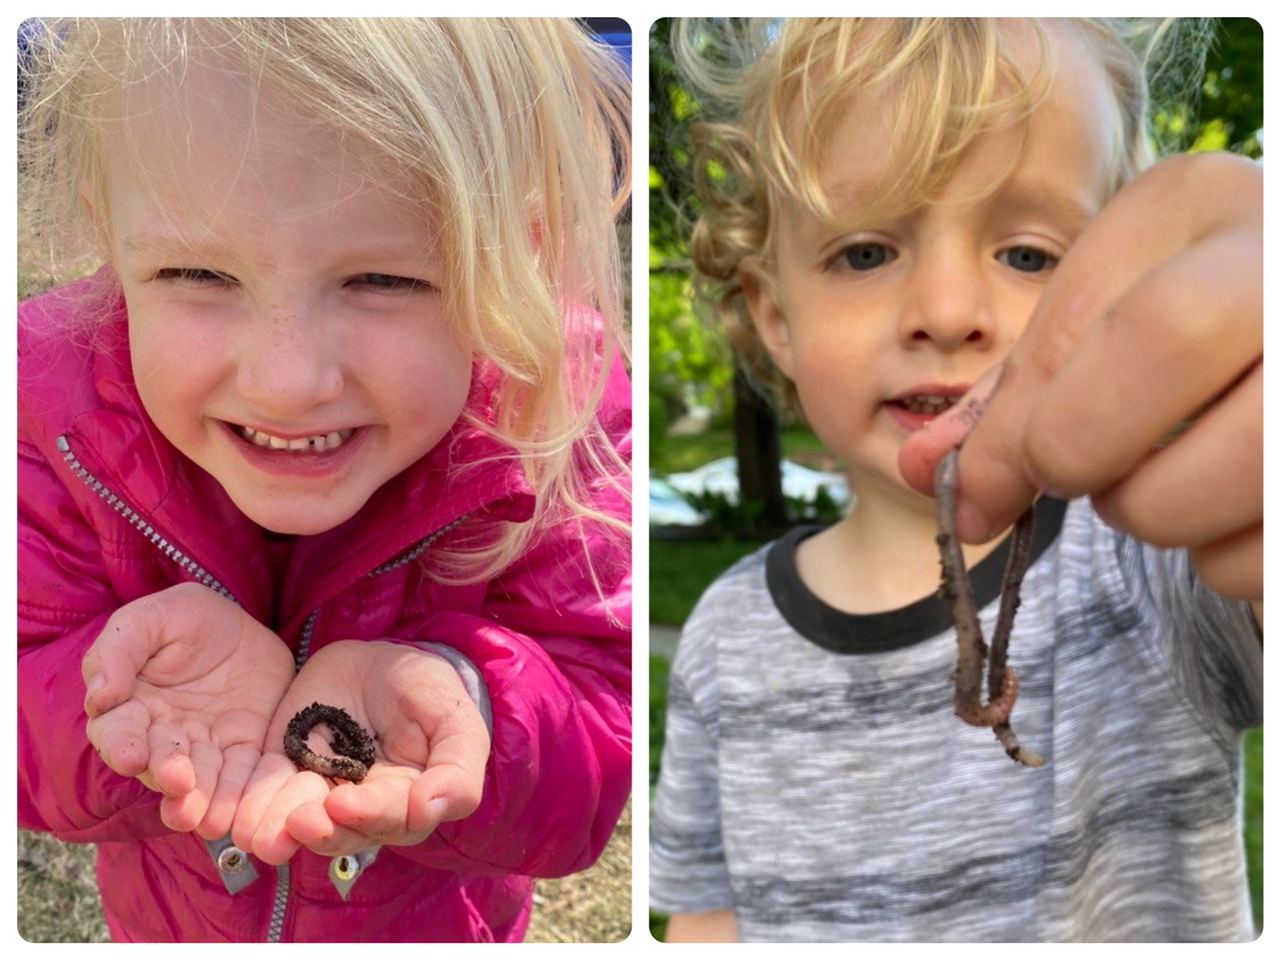 Our neighborhood worms got a lot of love this summer - Imogene named every one of them; Brennan thought they were cool.